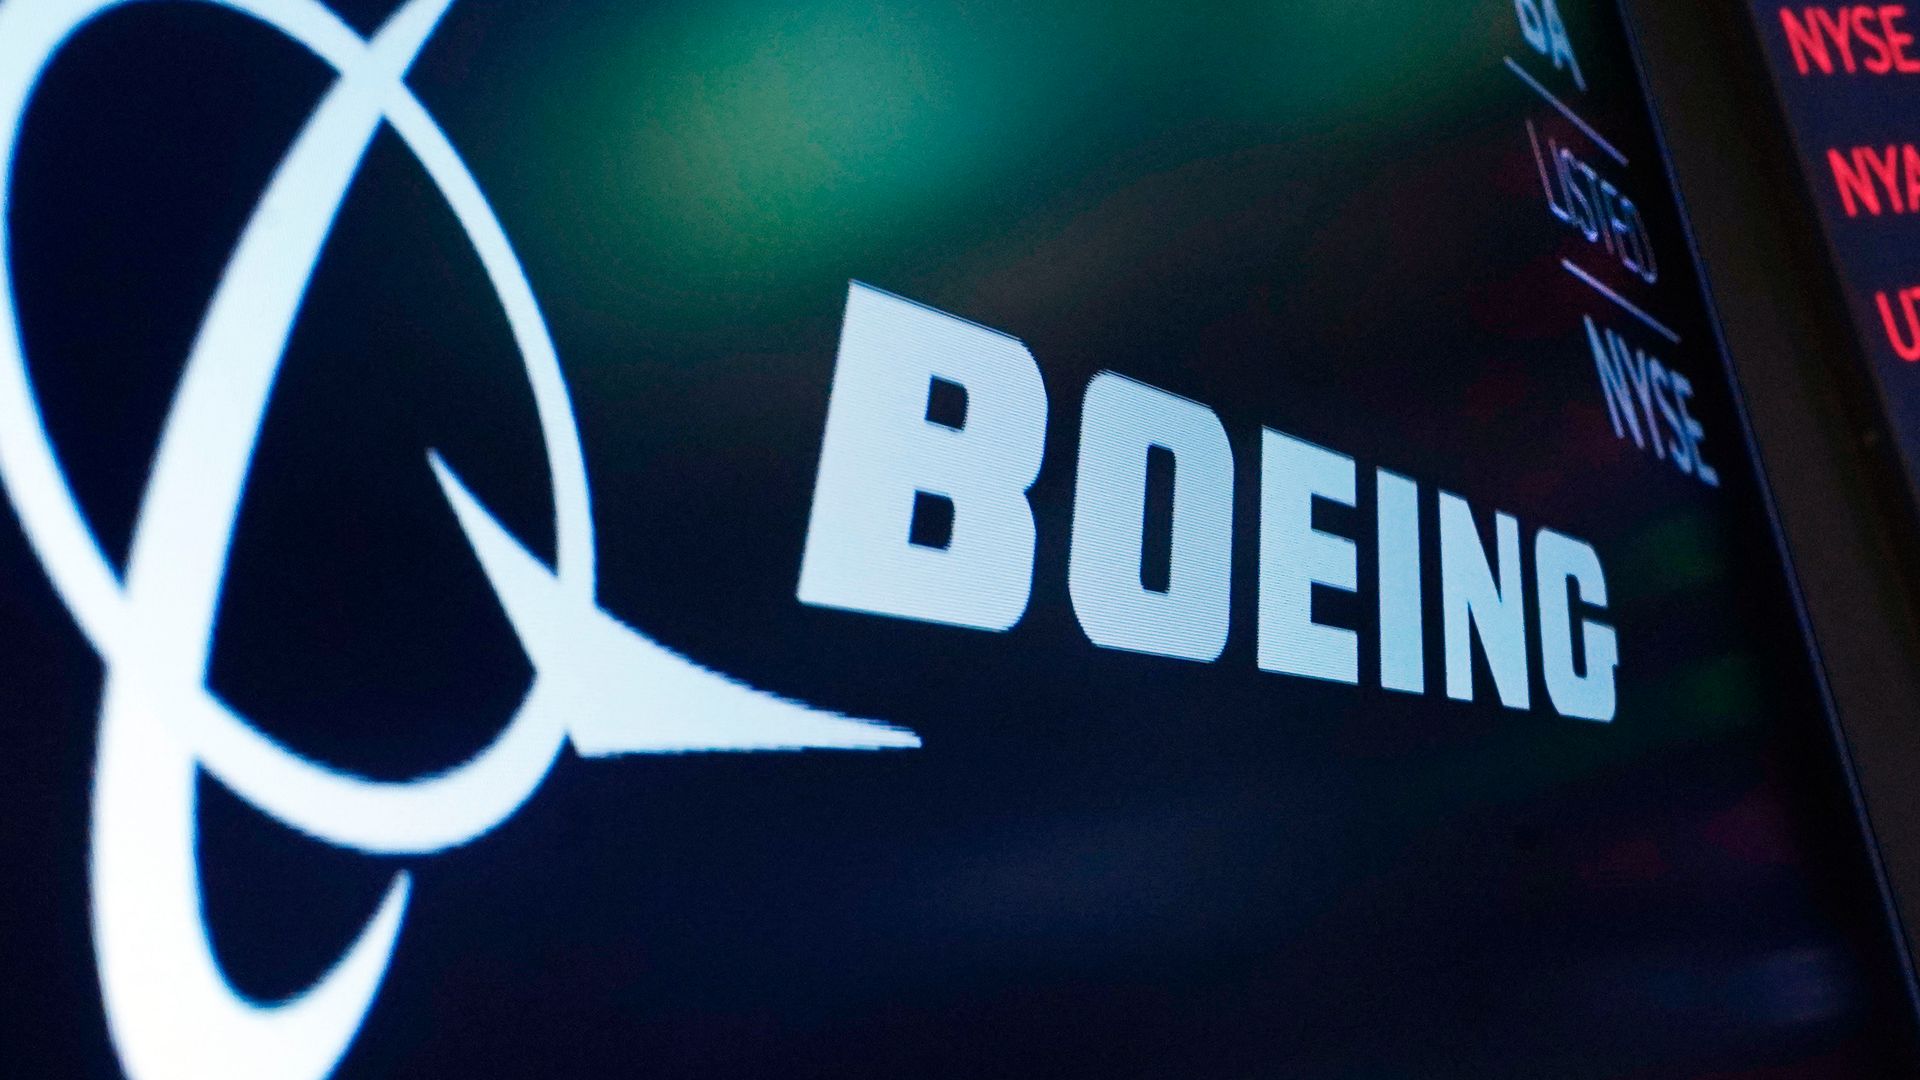 Boeing CEO faces Capitol Hill scrutiny over recent aircraft safety issues, pledging transparency and cooperation.